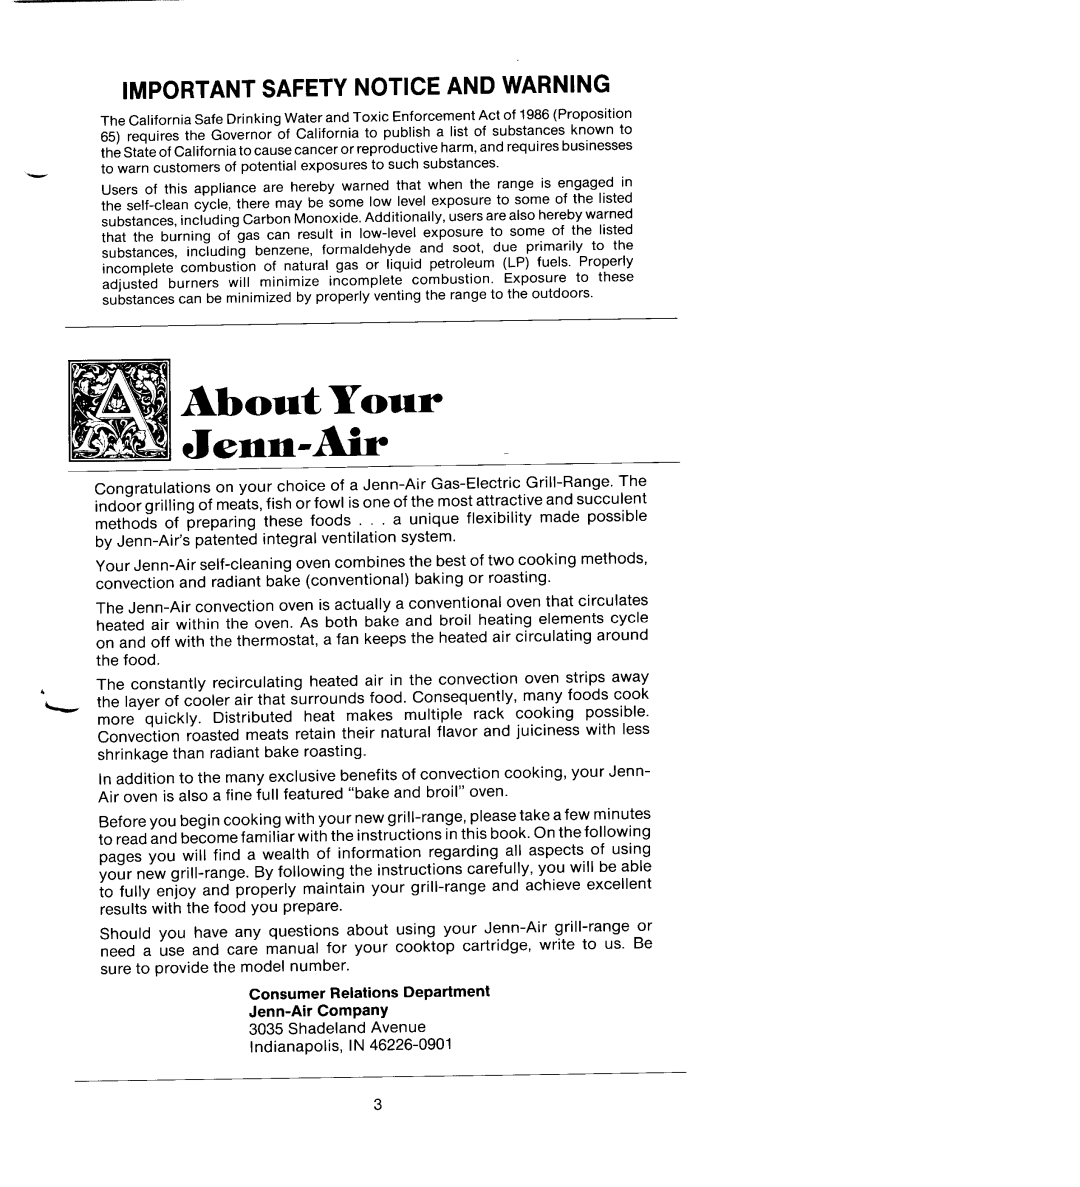 Jenn-Air SEG196 AboutJenn-AirYour, Important Safety Notice And Warning, Consumer Relations Department Jenn-AirCompany 